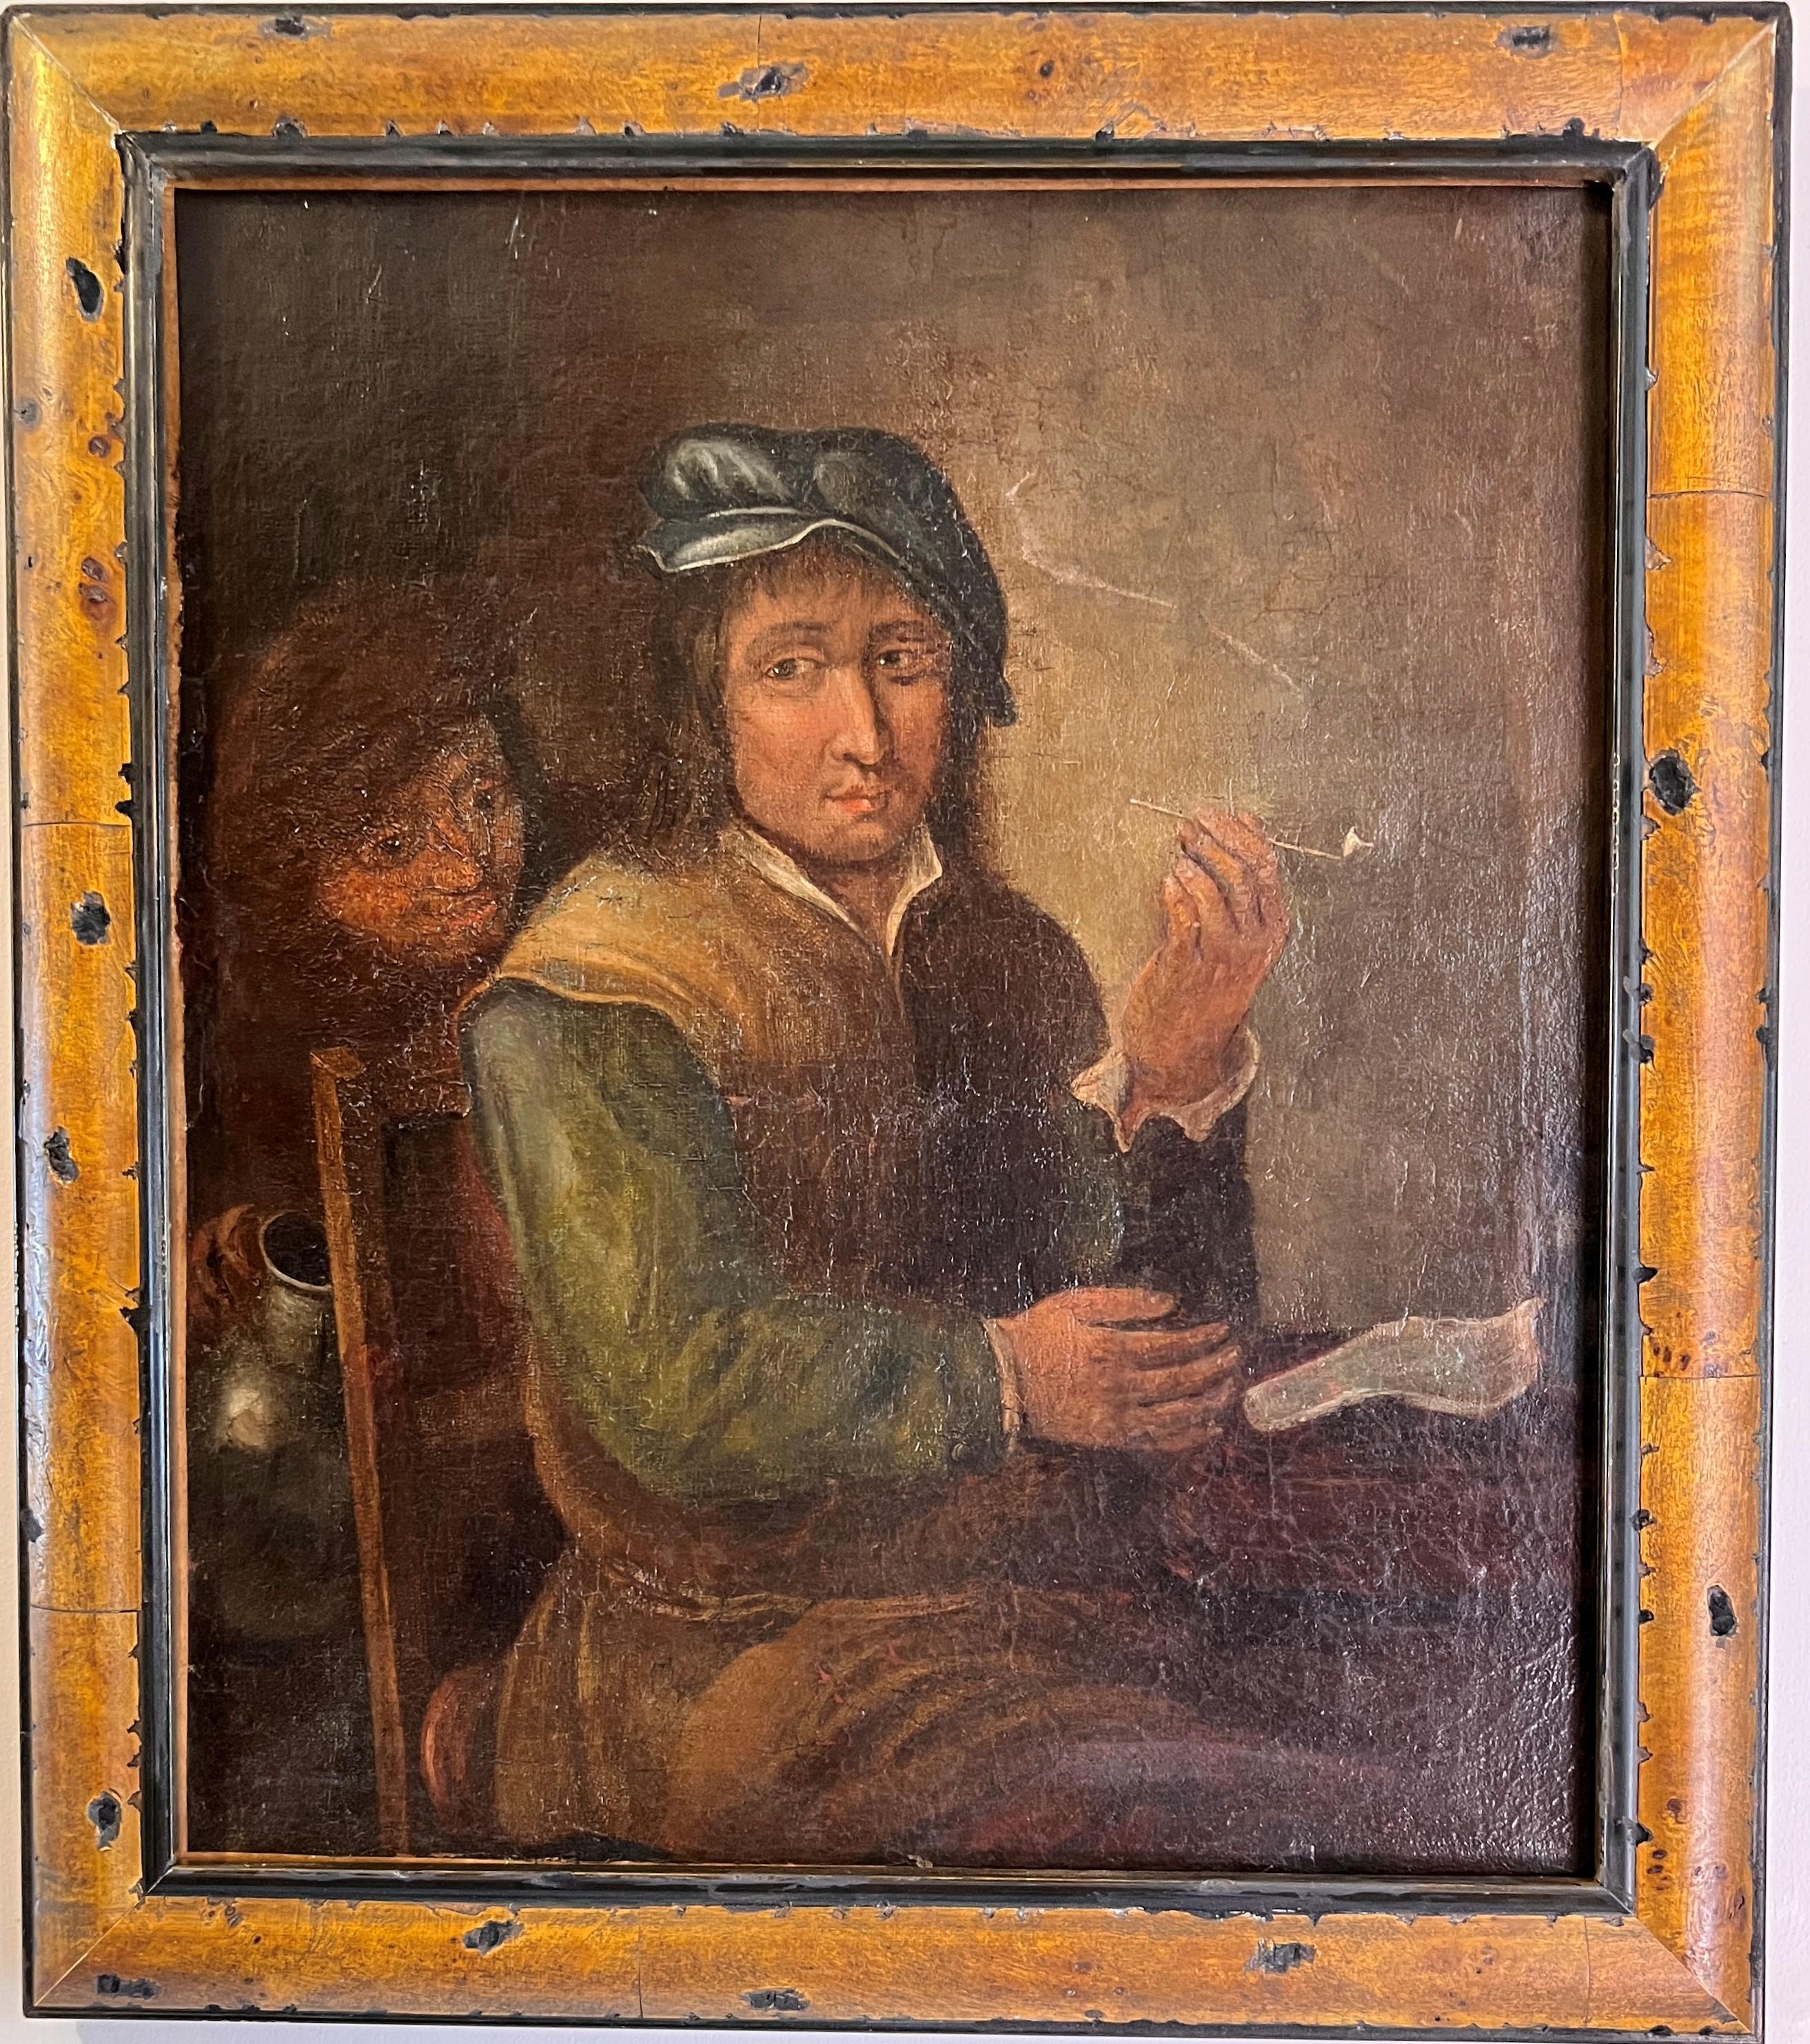 Unknown Portrait Painting - 17th-18th C. original Oil on Canvas, Genre Scene with Figures in a Tavern